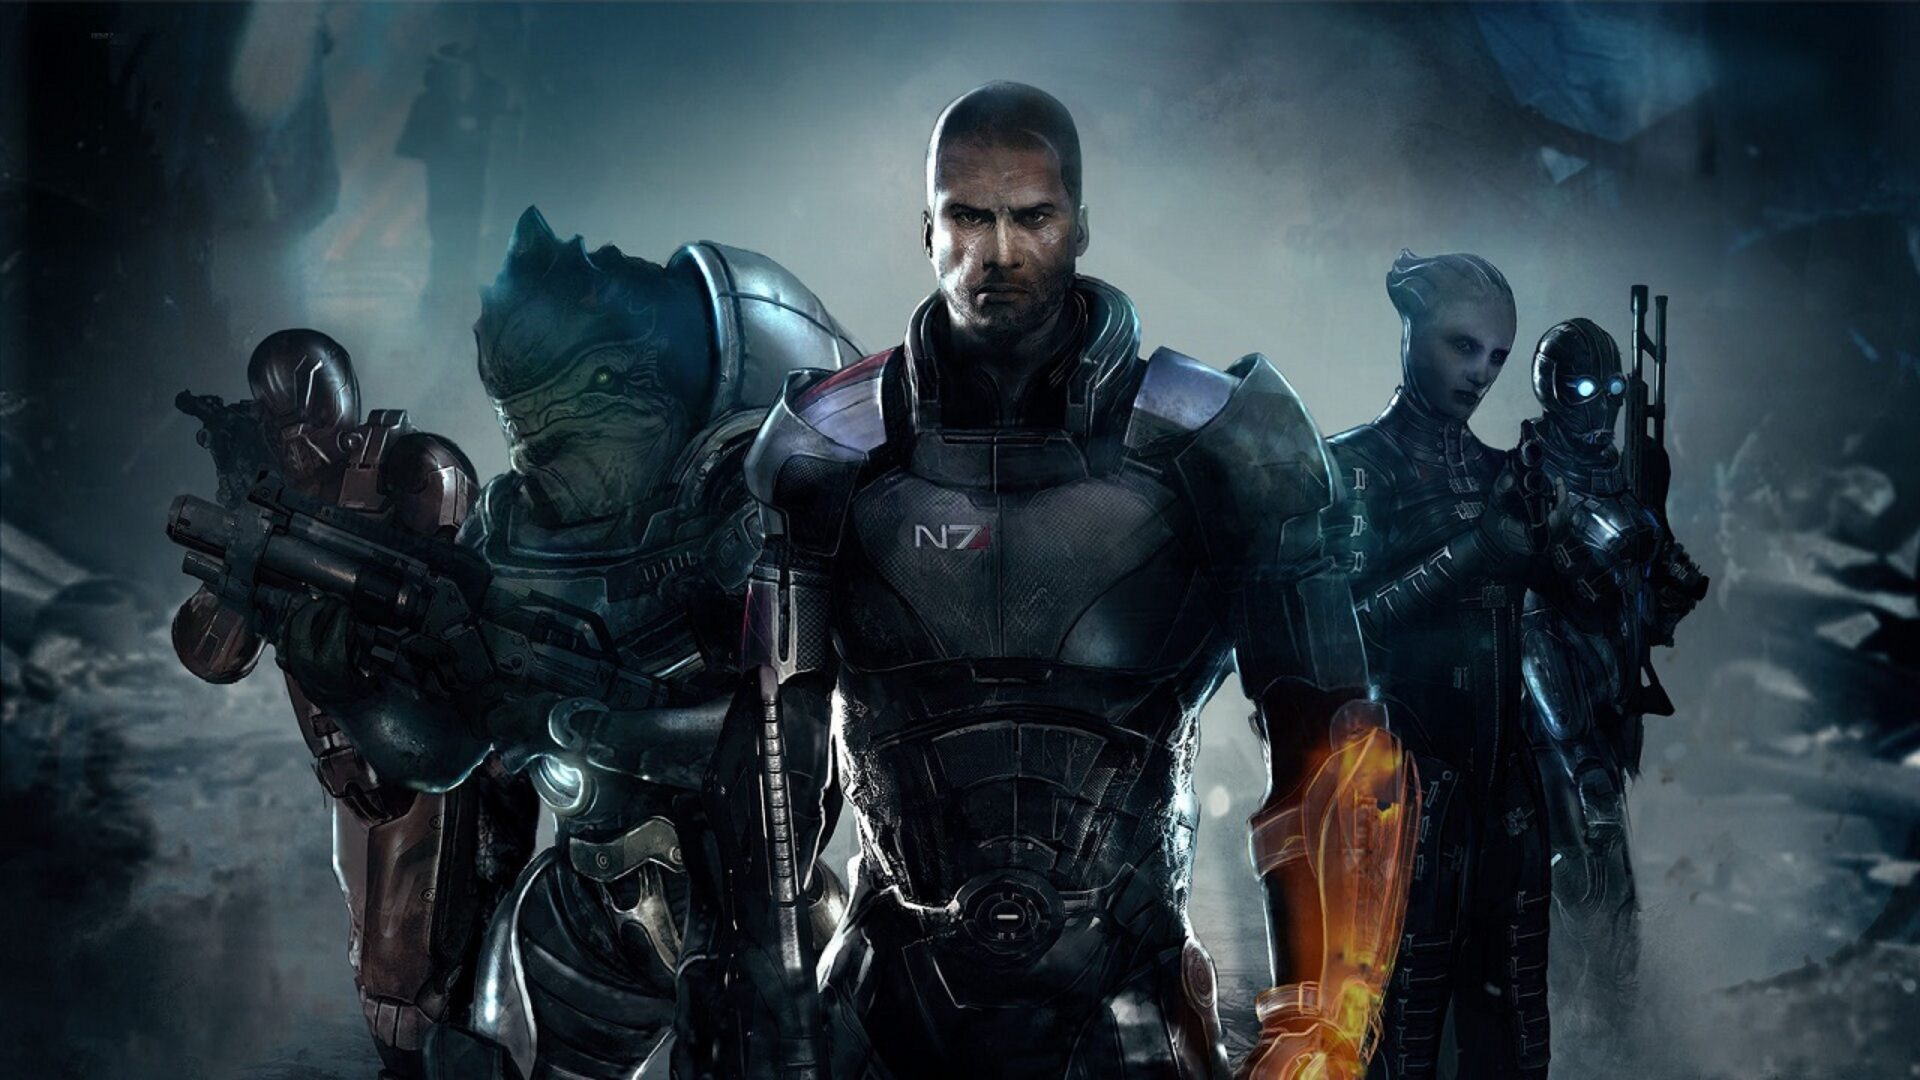 E3 2014: BioWare Teases New IP and Announces Mass Effect in the Works